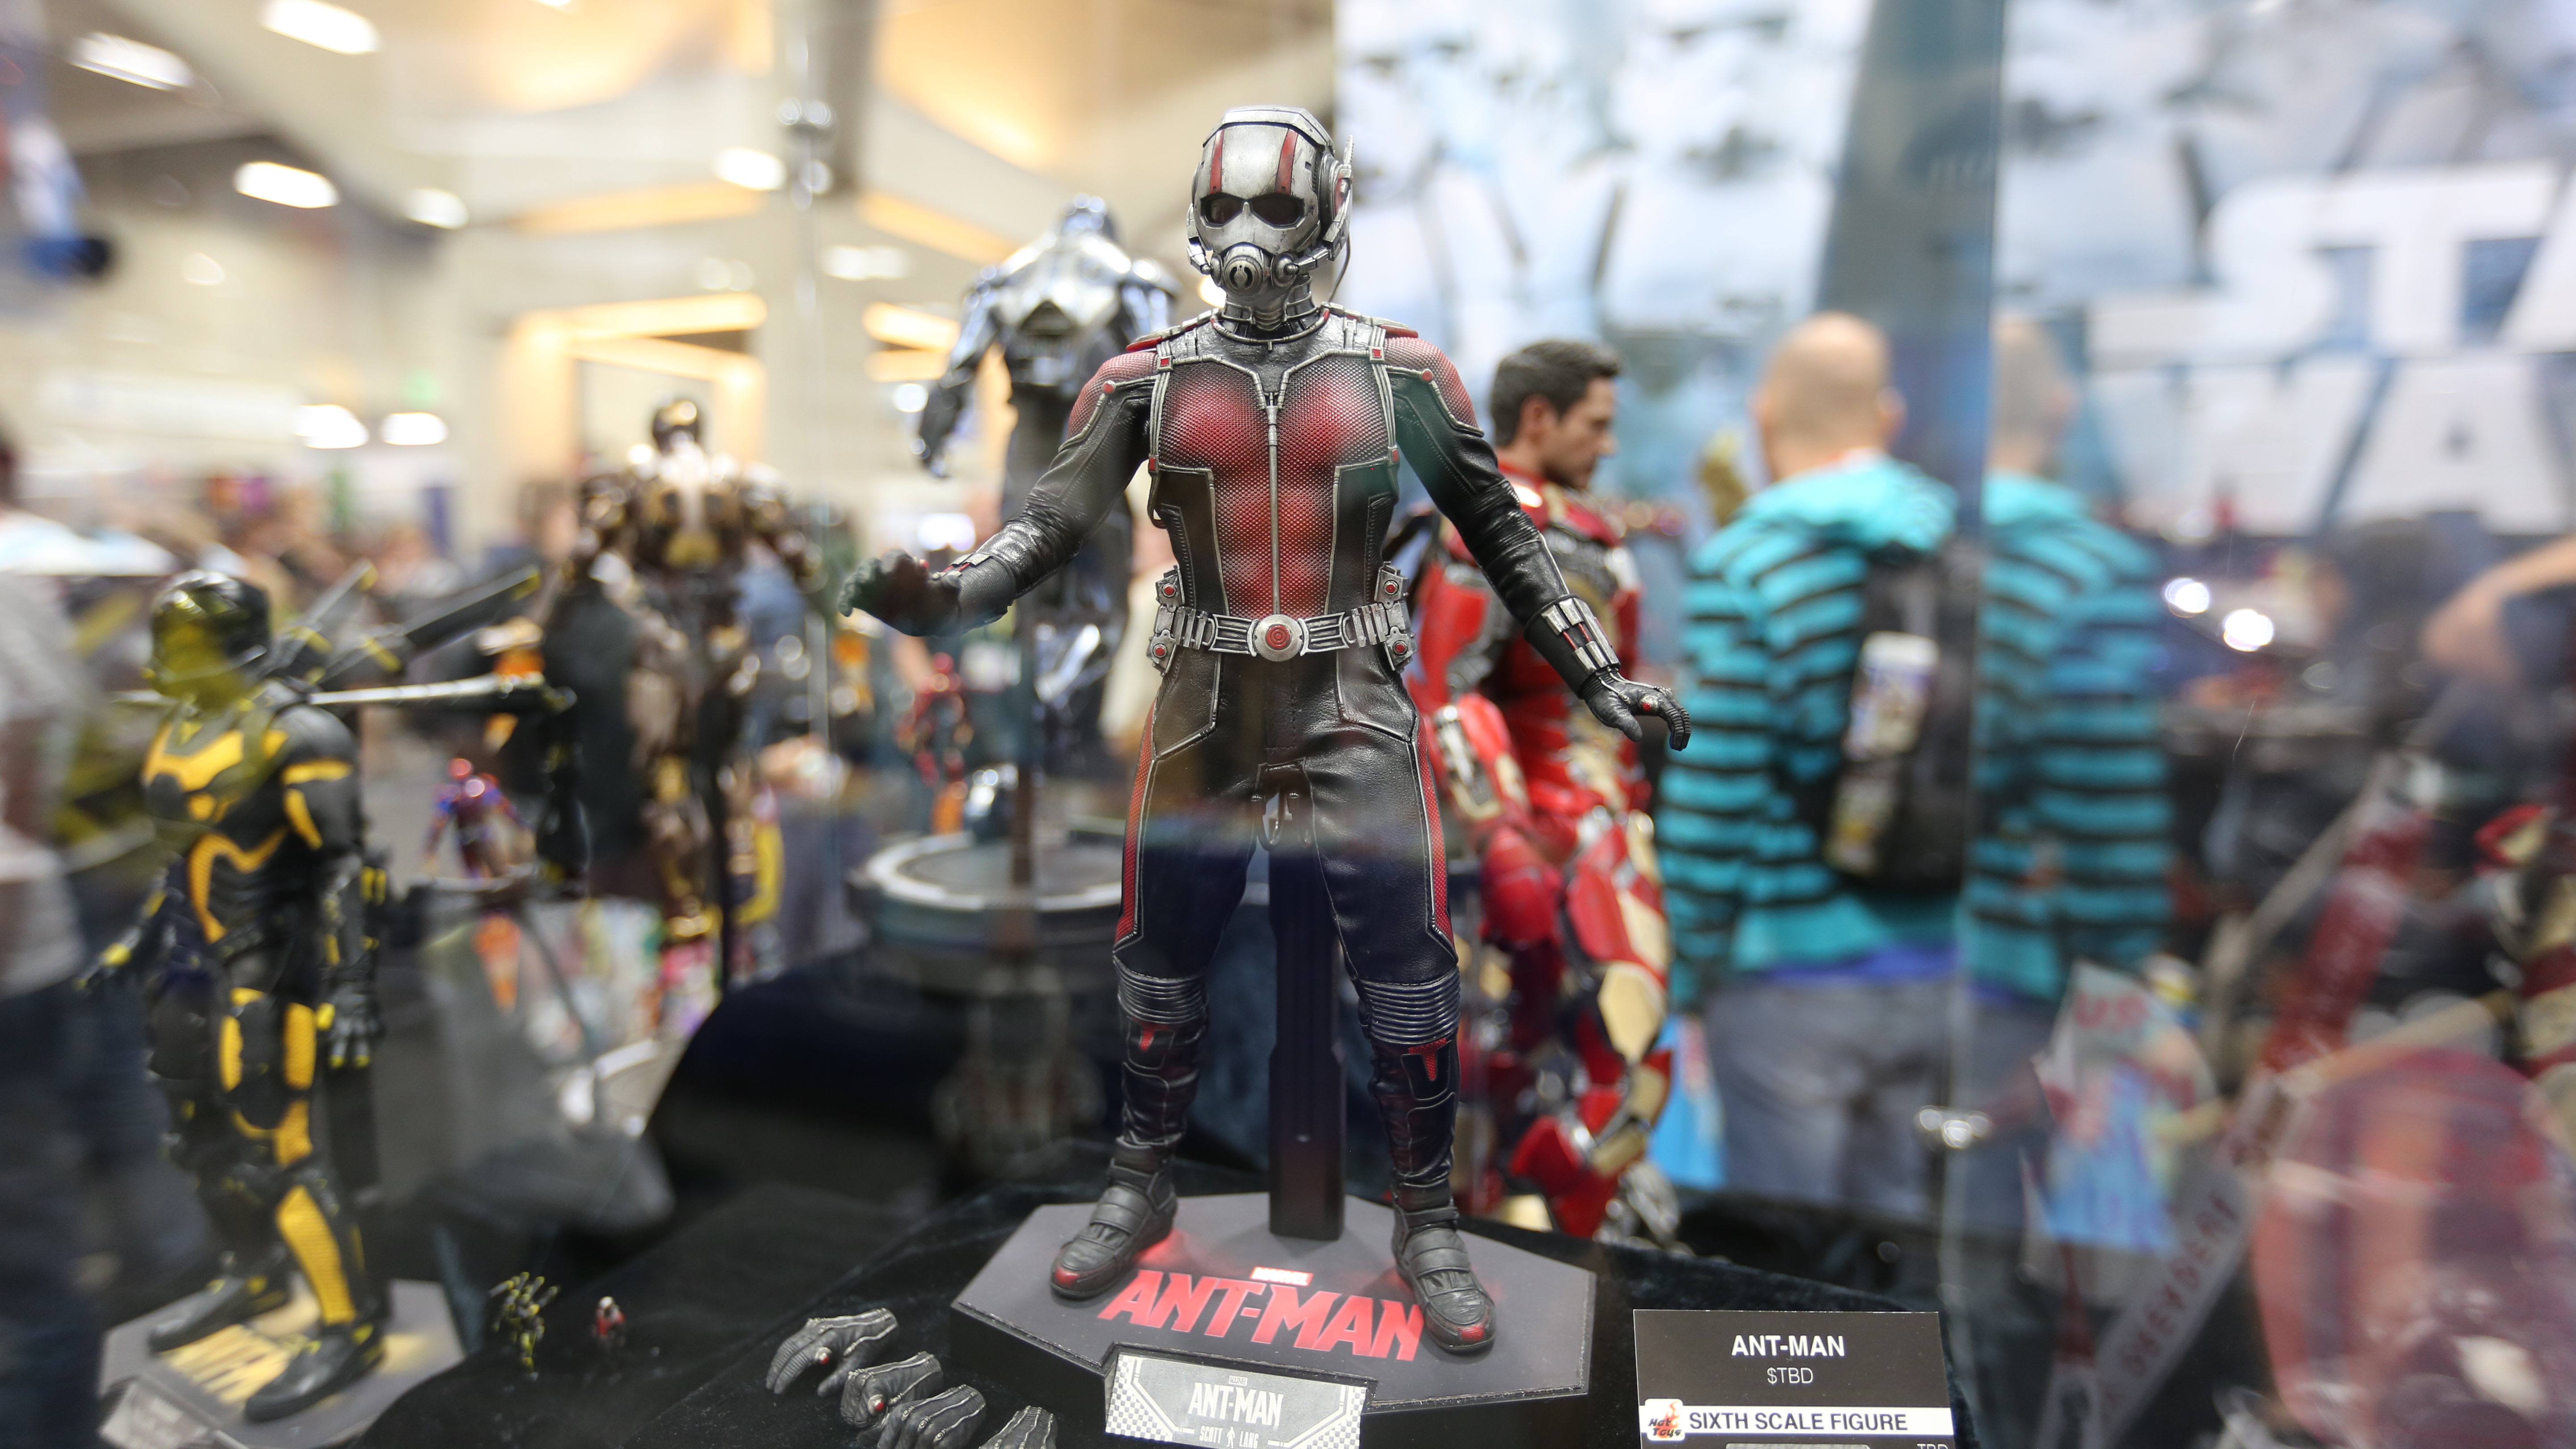 ant-man-hot-toys-sideshow-collectibles-booth-picture-comic-con-1.jpg